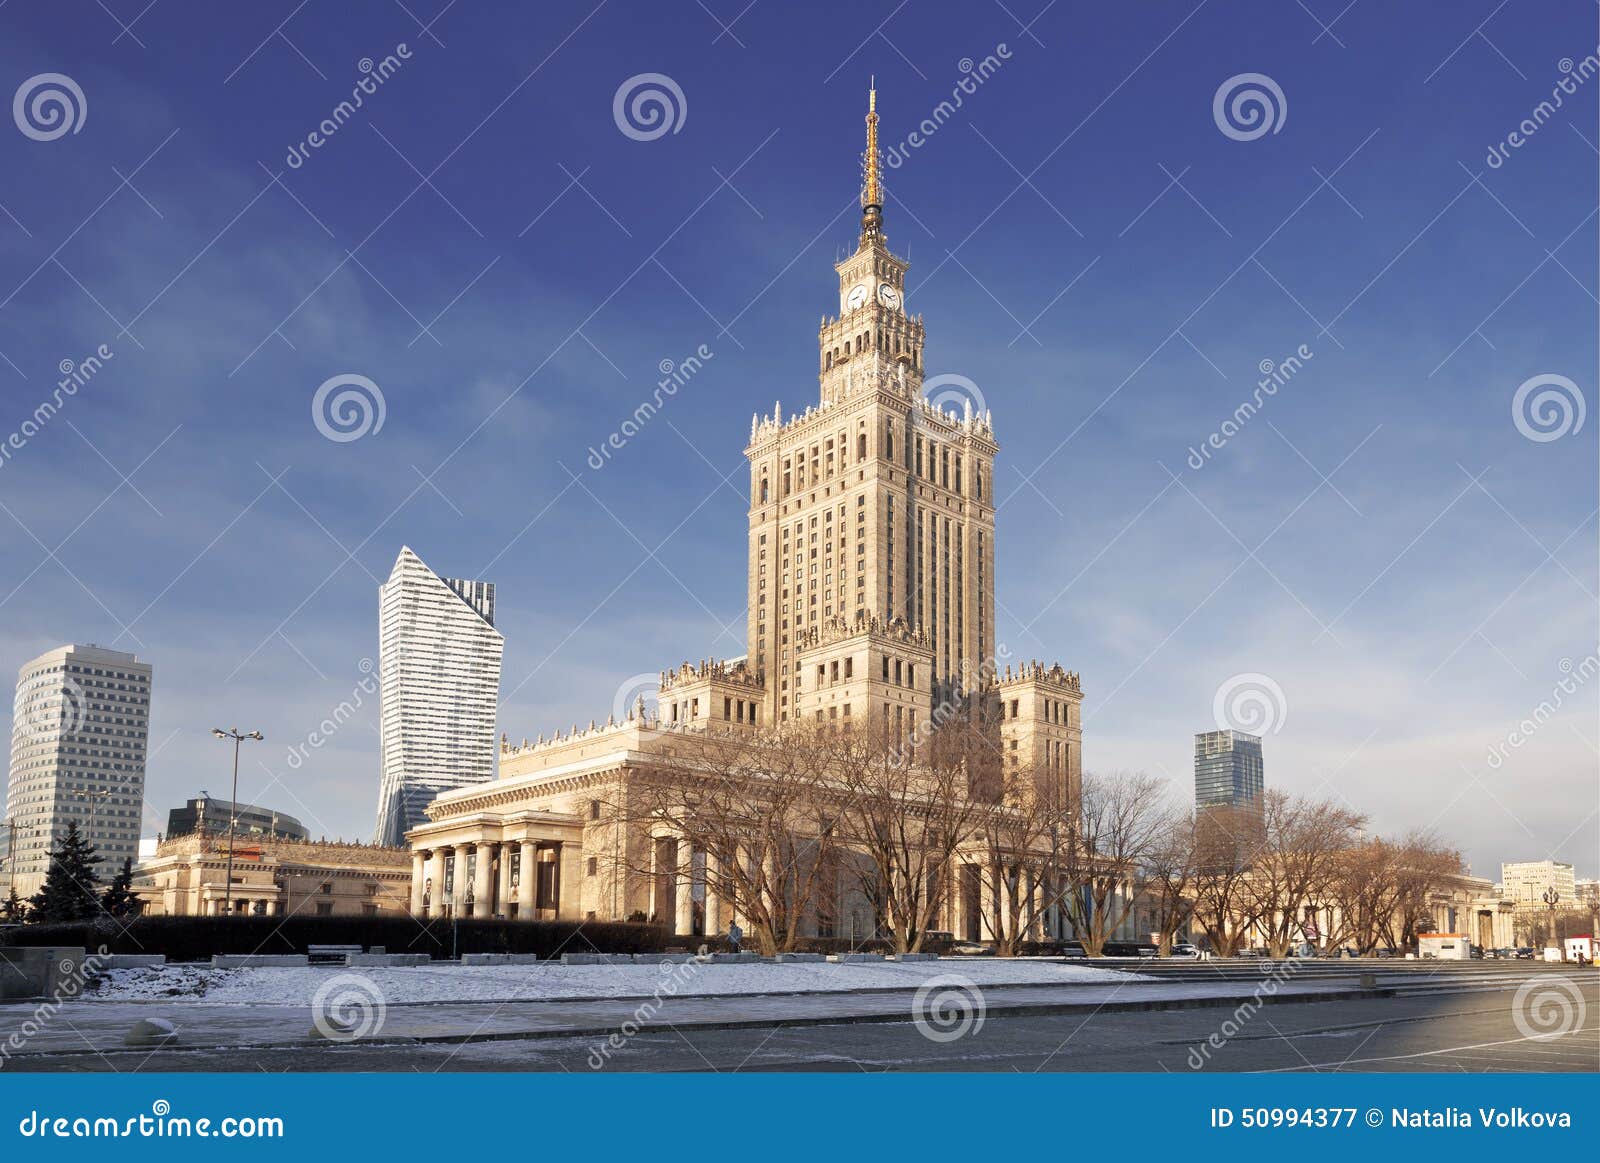 warsaw most famous landmark - palace of culture and science